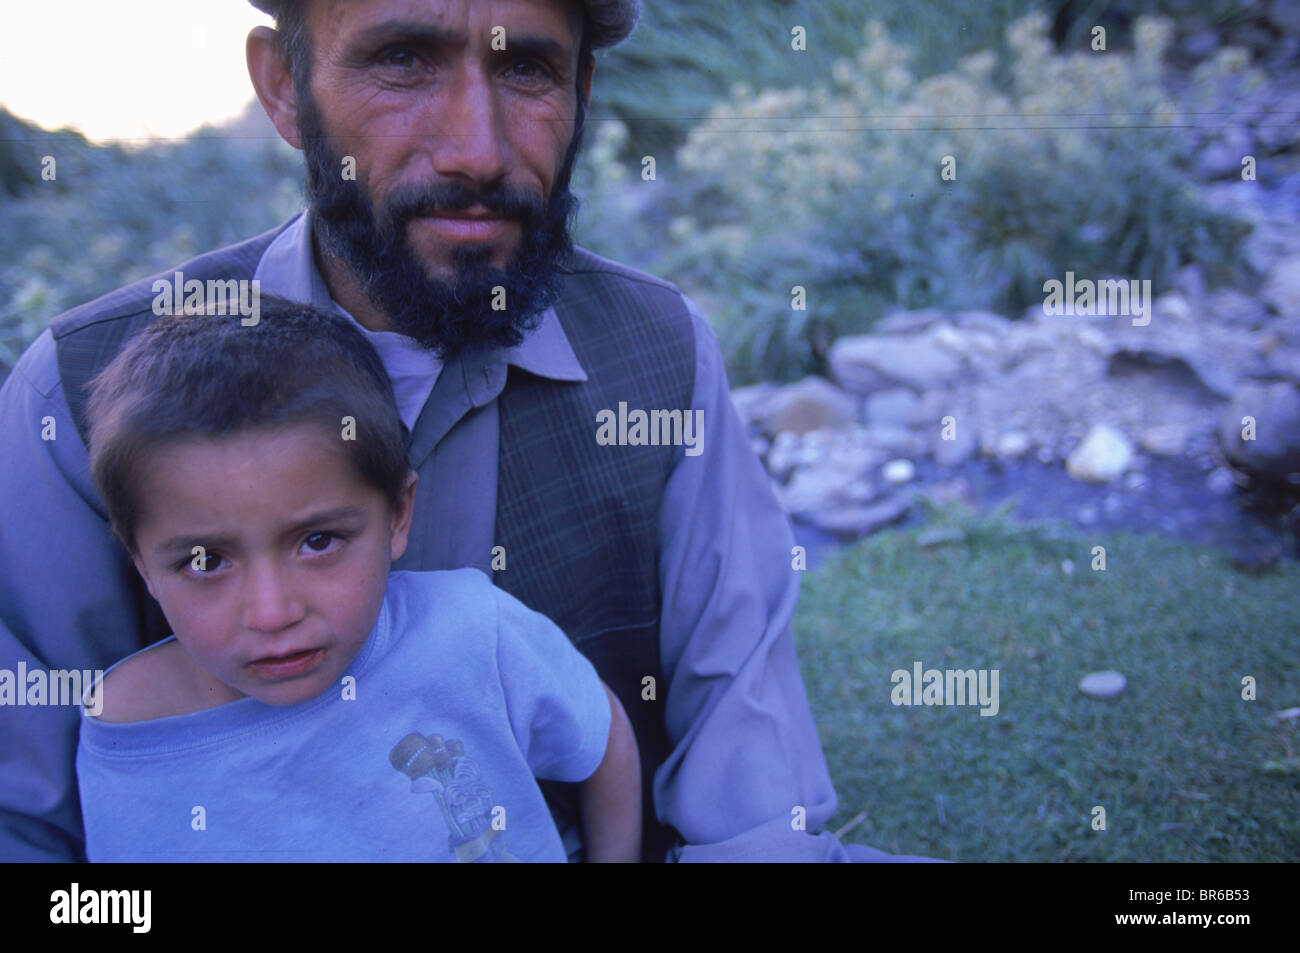 A Tajik man and his son relax in a field in the Panjshir Valley Hindu Kush mountains. Stock Photo